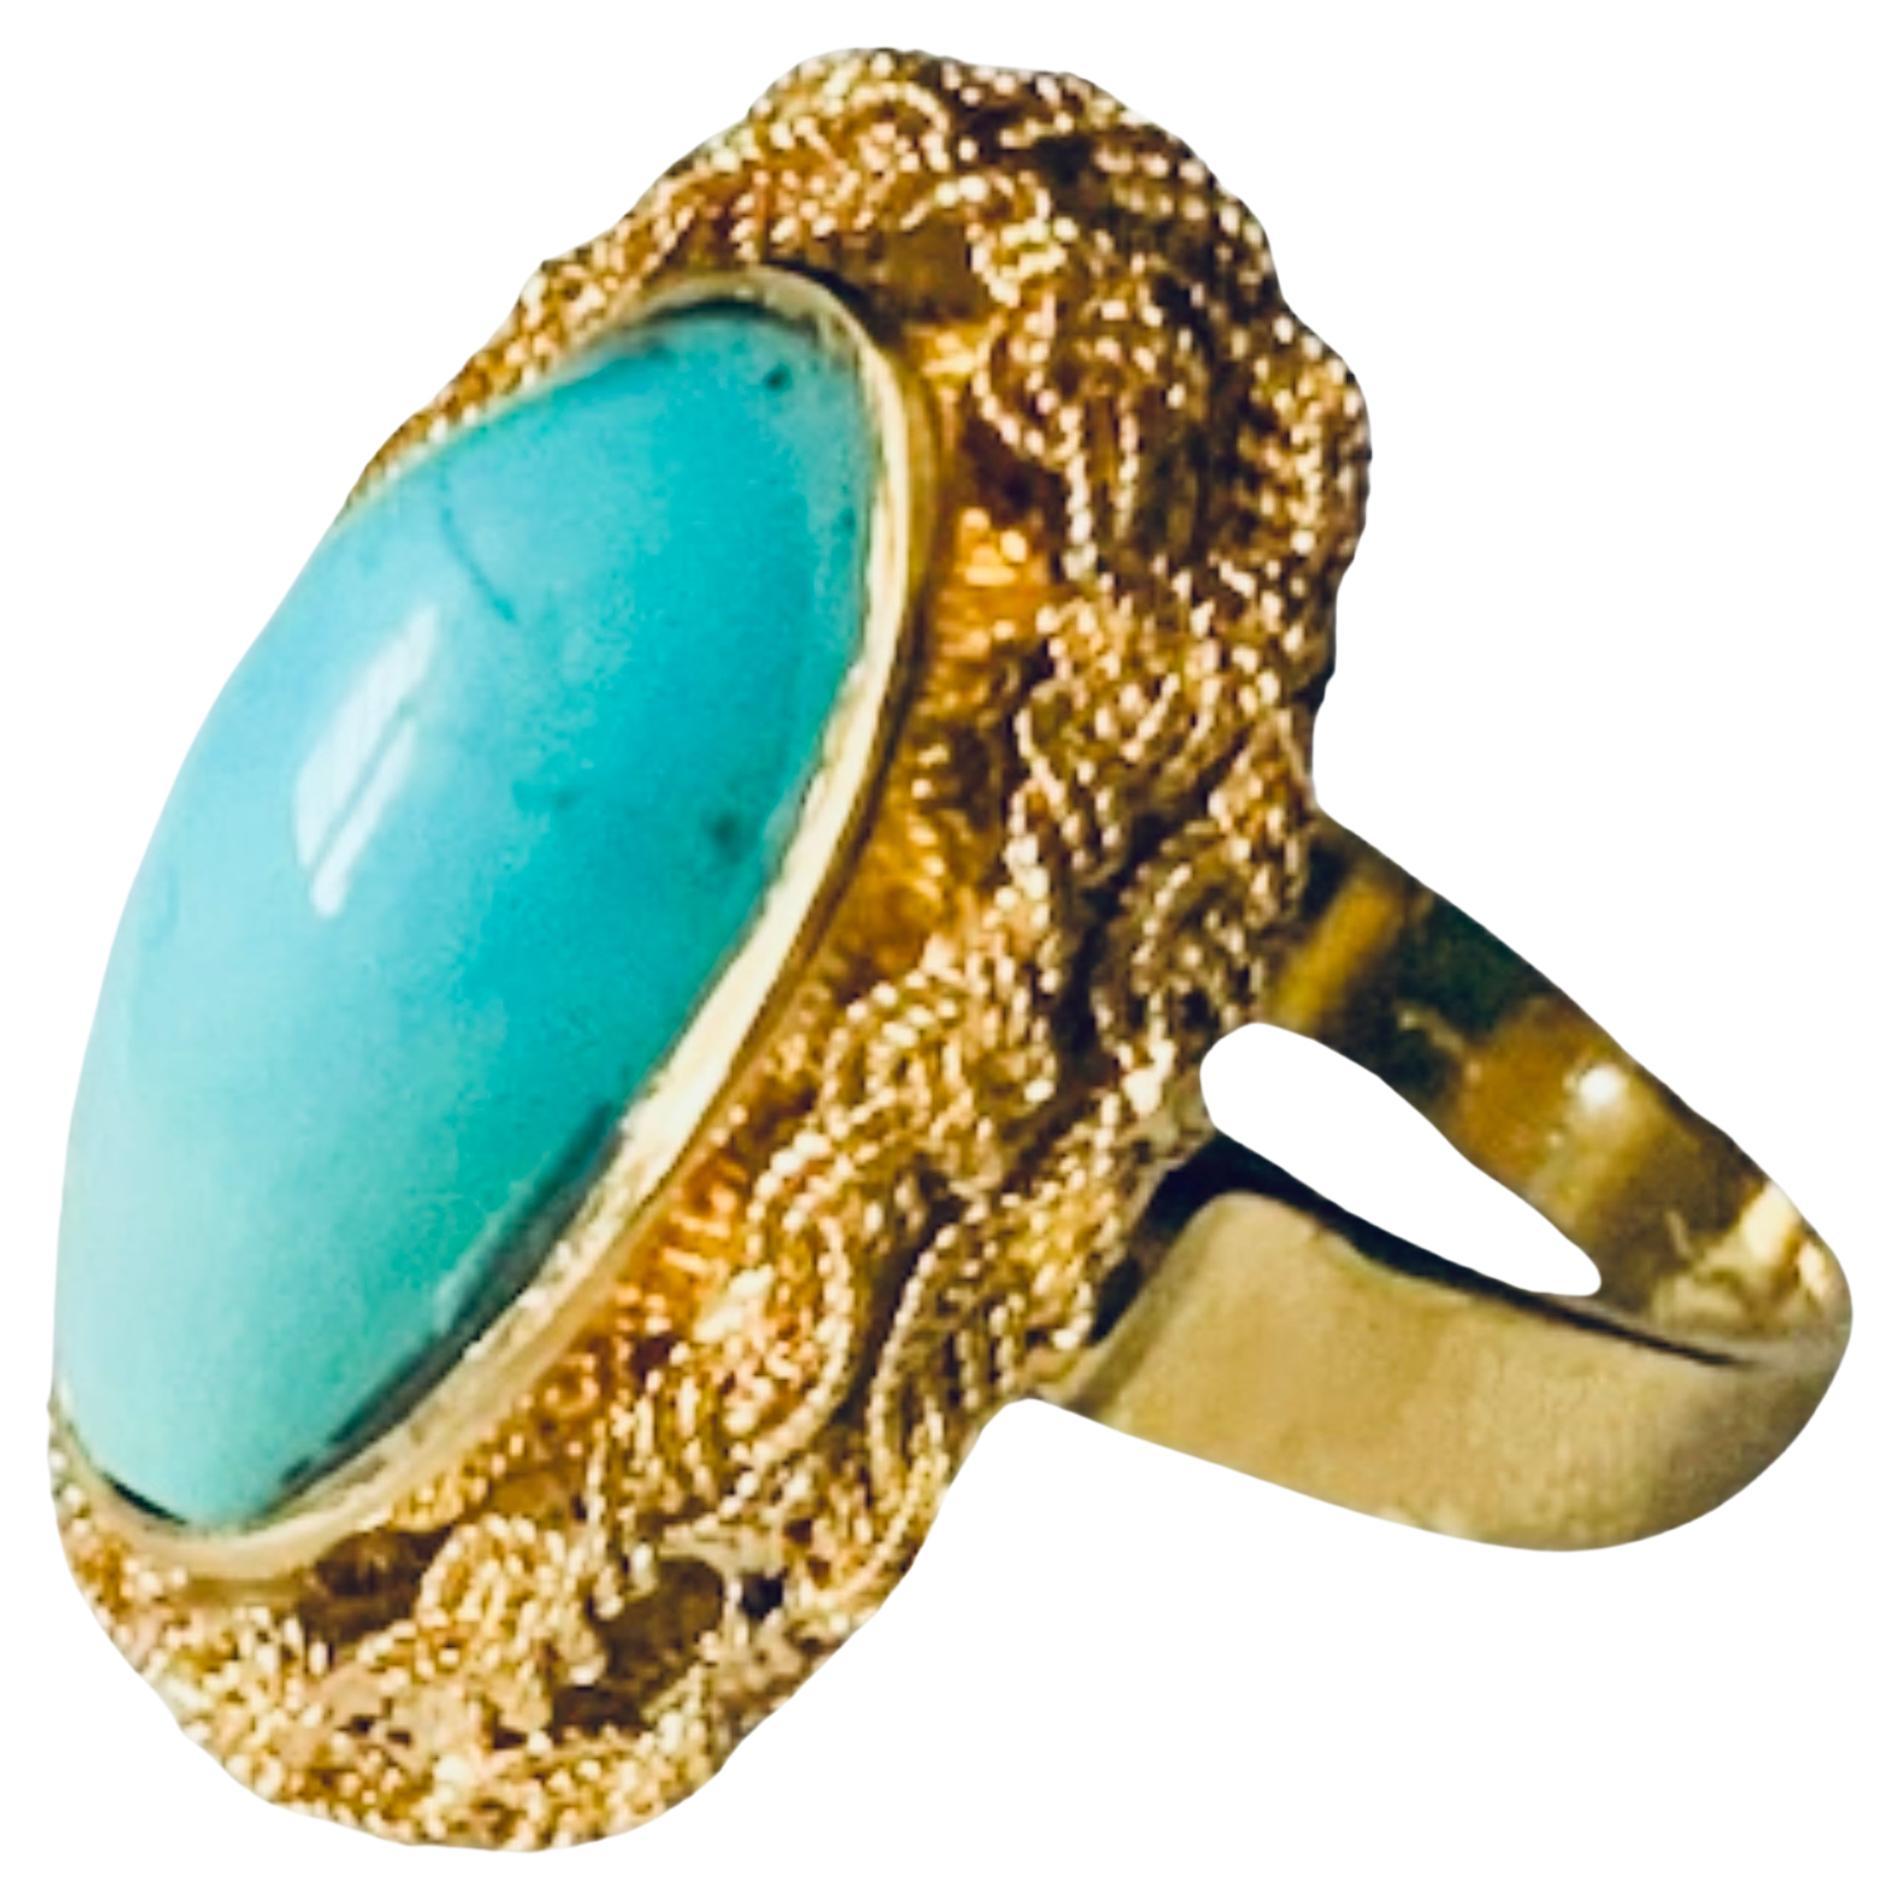 This is an Italian 18K yellow gold and Turquoise cocktail ring. It depicts an elongated oblong shaped cabochon Turquoise stone mounted in gold bezel setting and surrounded by a gold wreath made of double braided ropes. The Turquoise’s width and